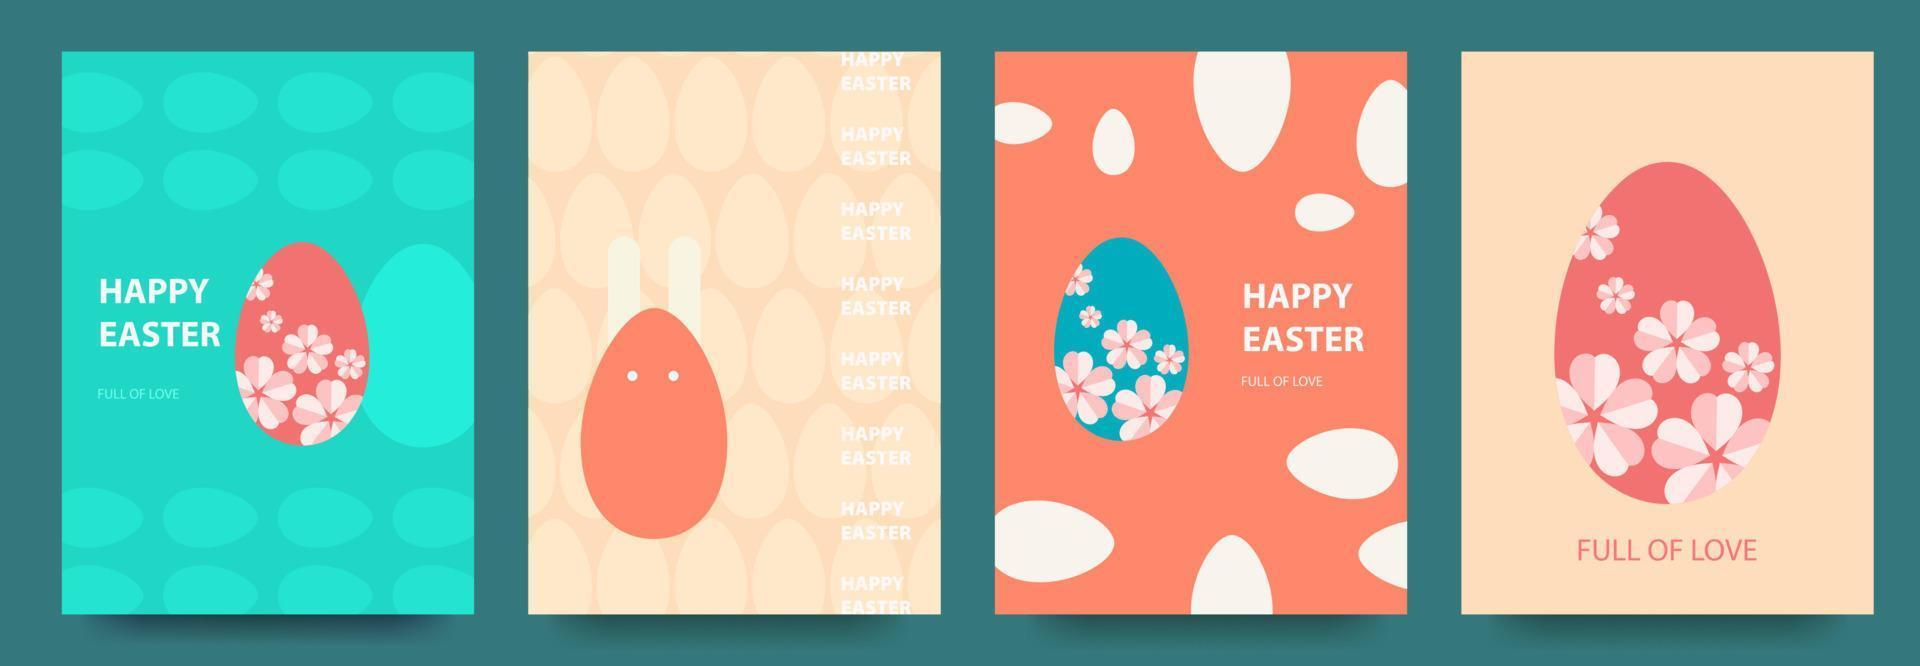 Happy easter Set of vector easter cards with easter eggs, bunny, patterns. Modern geometric abstract style.Vector illustration